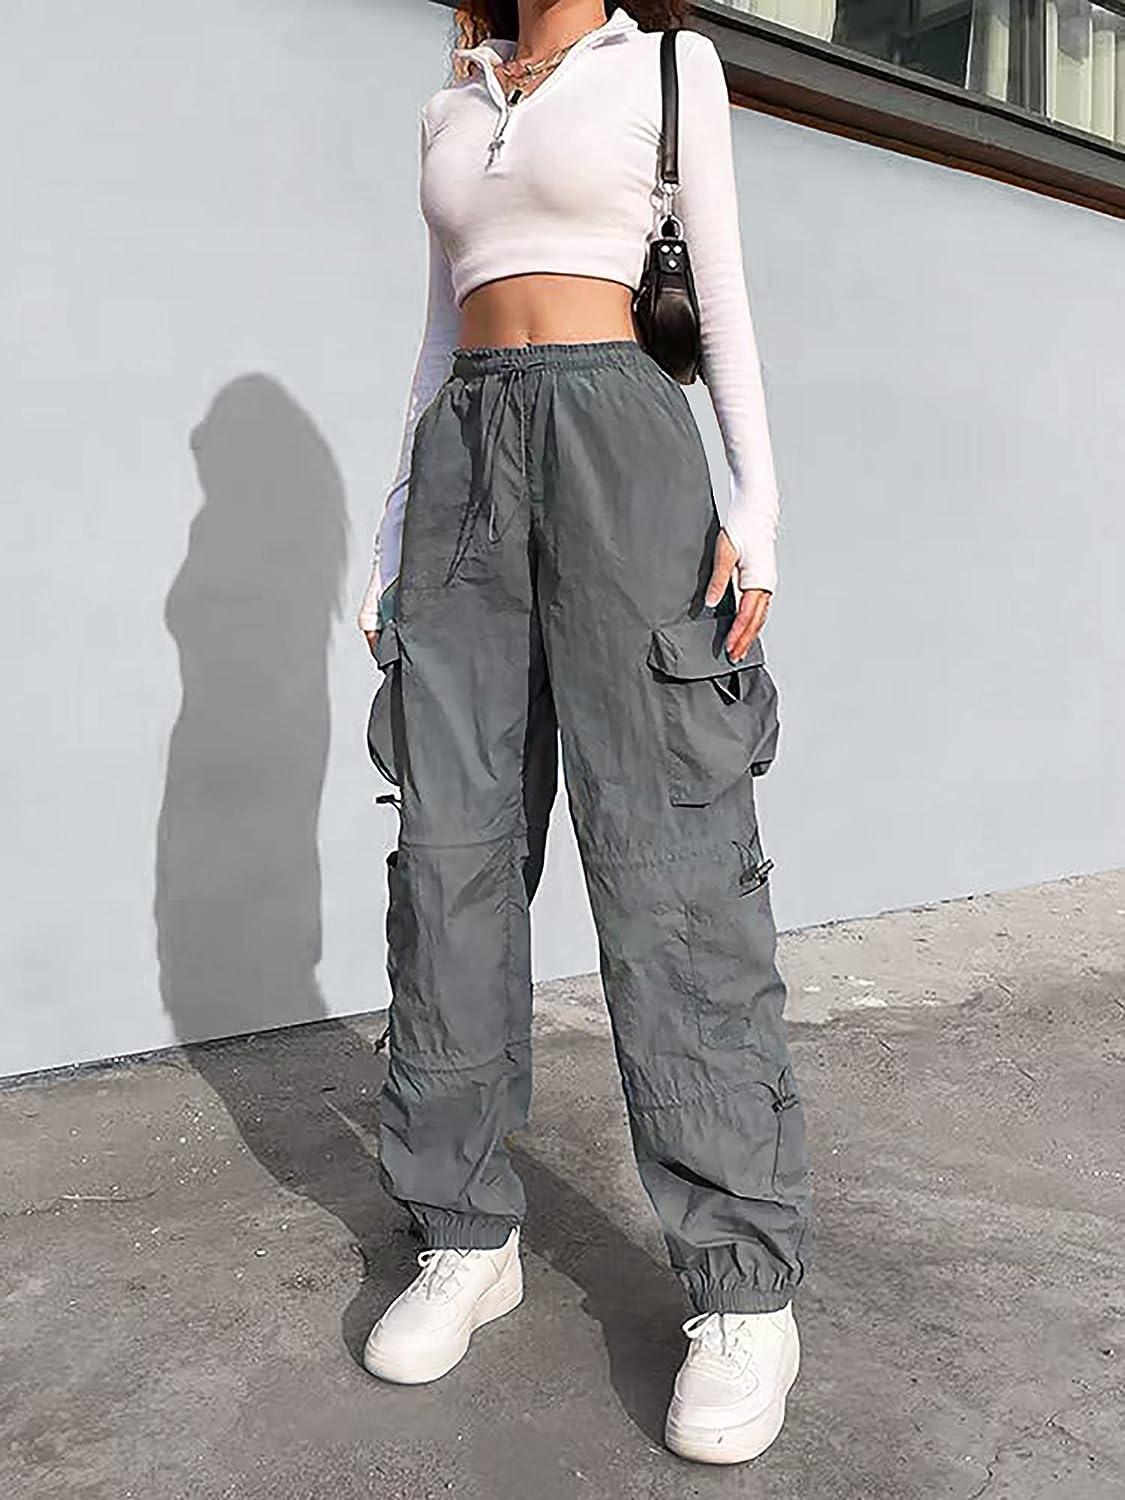 Women's Baggy Cargo Pants Drawstring Elastic Waist Ruched Hiking Pants  Parachute Pants for Women Hippie Lounge Pant A Grey Small